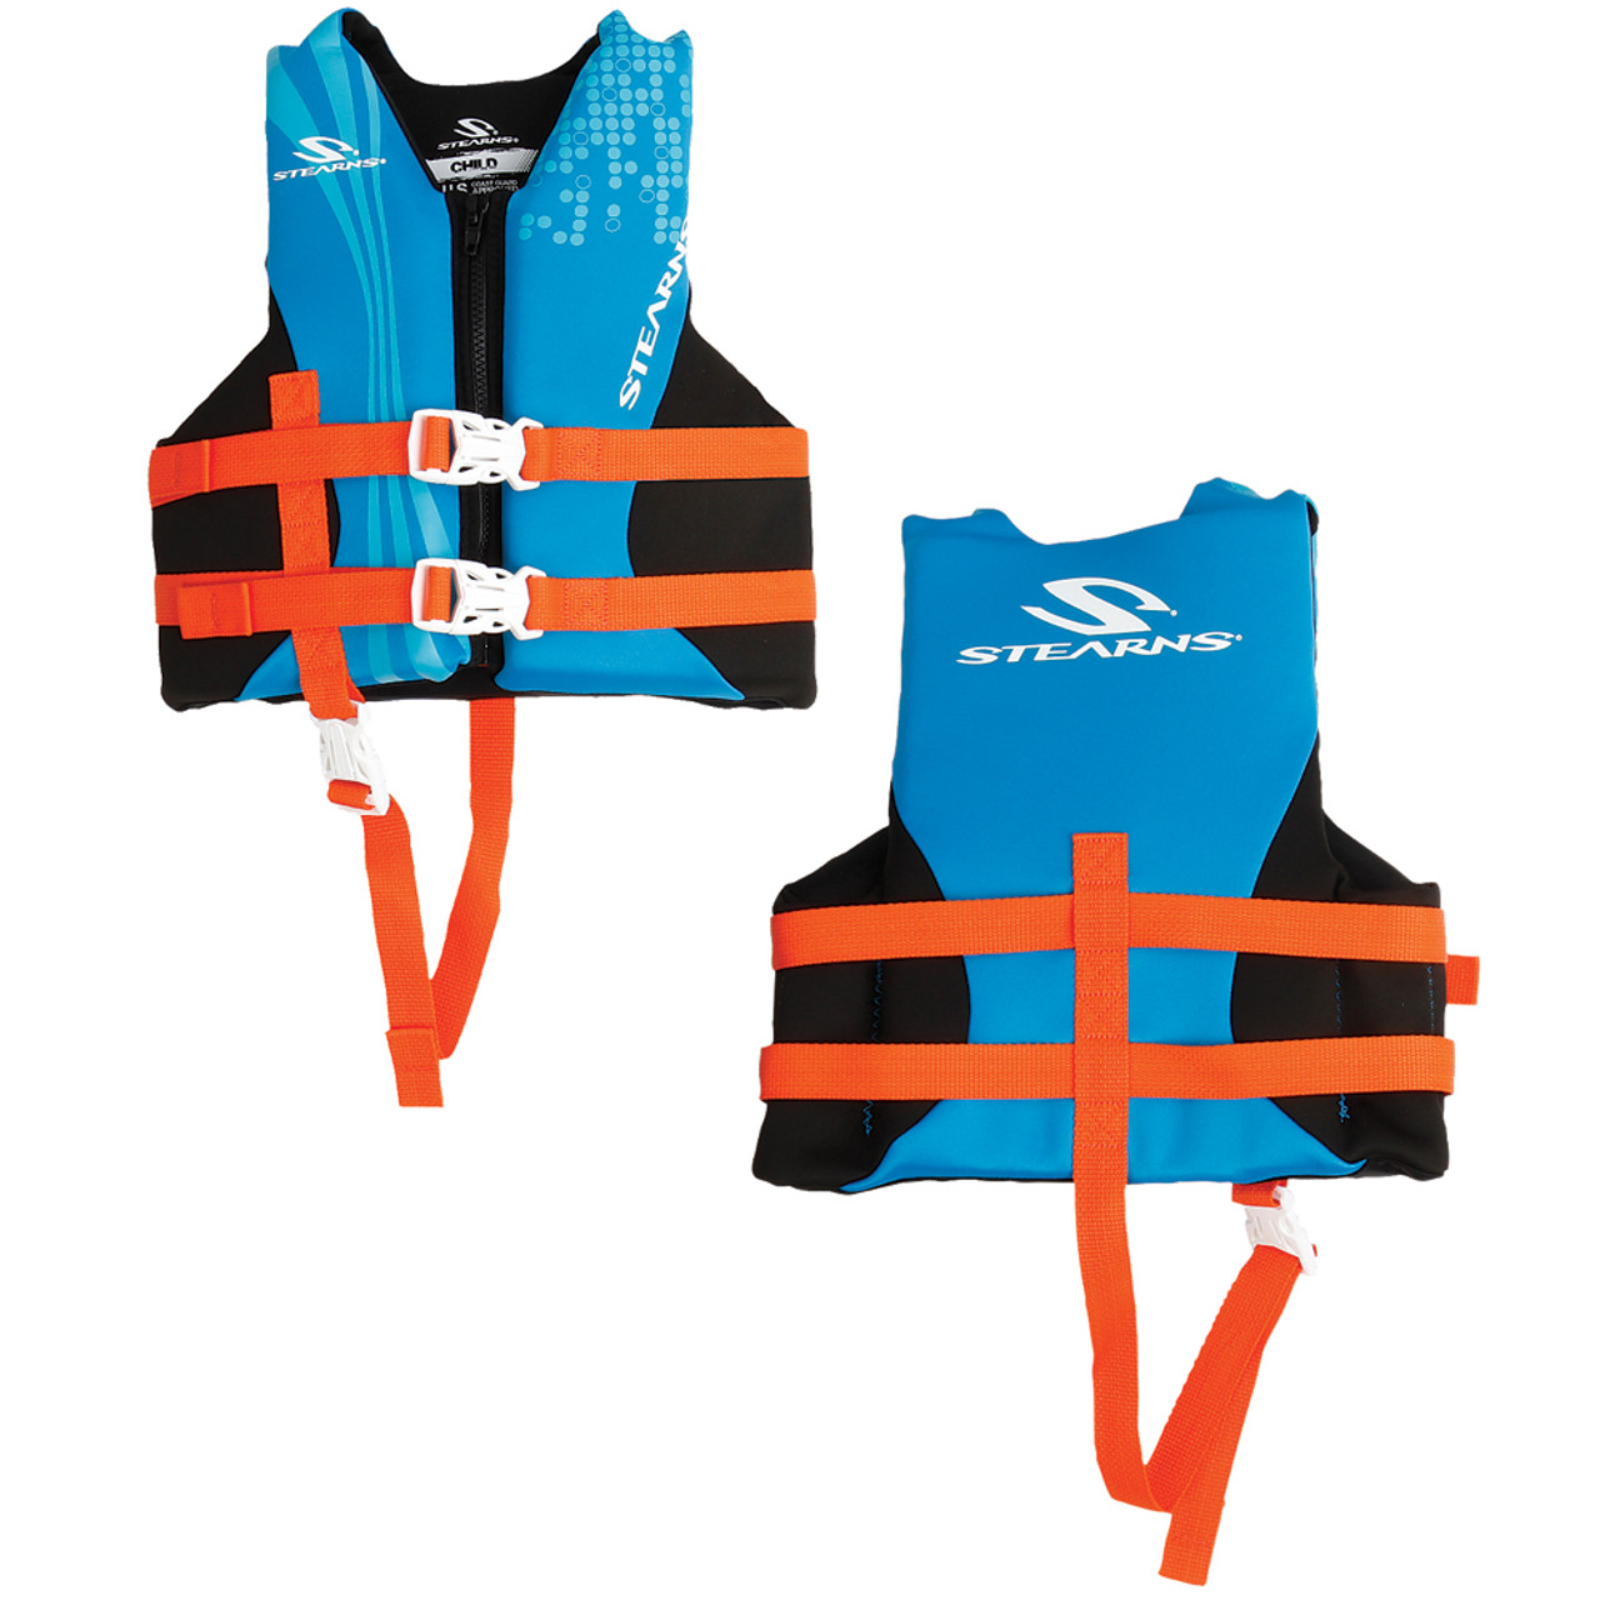 The Coleman PFD 5417 Hydro Child Dark Blue features a hydroprene construction with Crosstech foam. It features a zippered closure. This US Coastguard approved vest has a buoyancy rating for children 3...